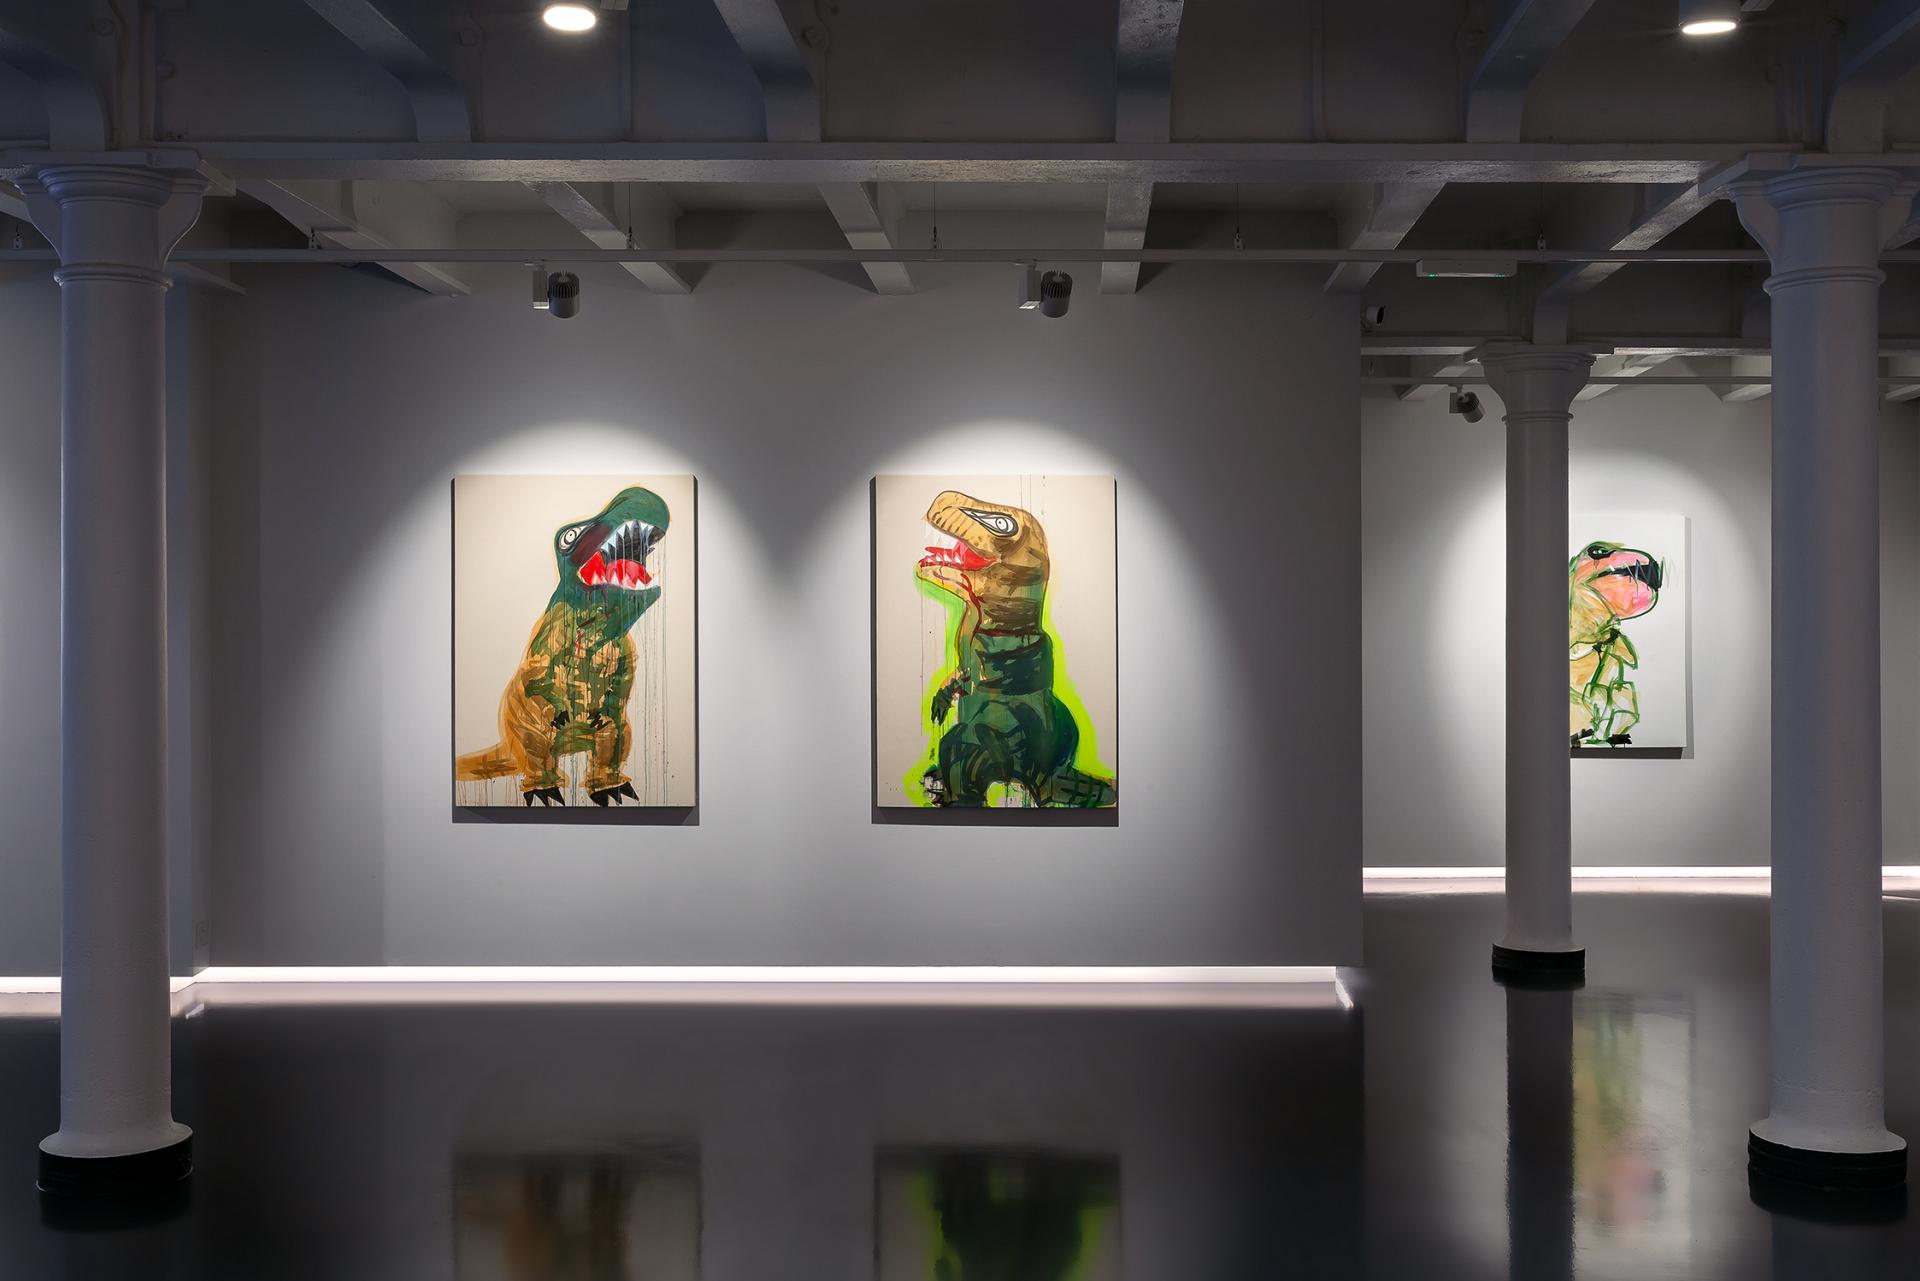 Feast for the Senses: A 'Terror' Takes Over London's New Concept Art Gallery